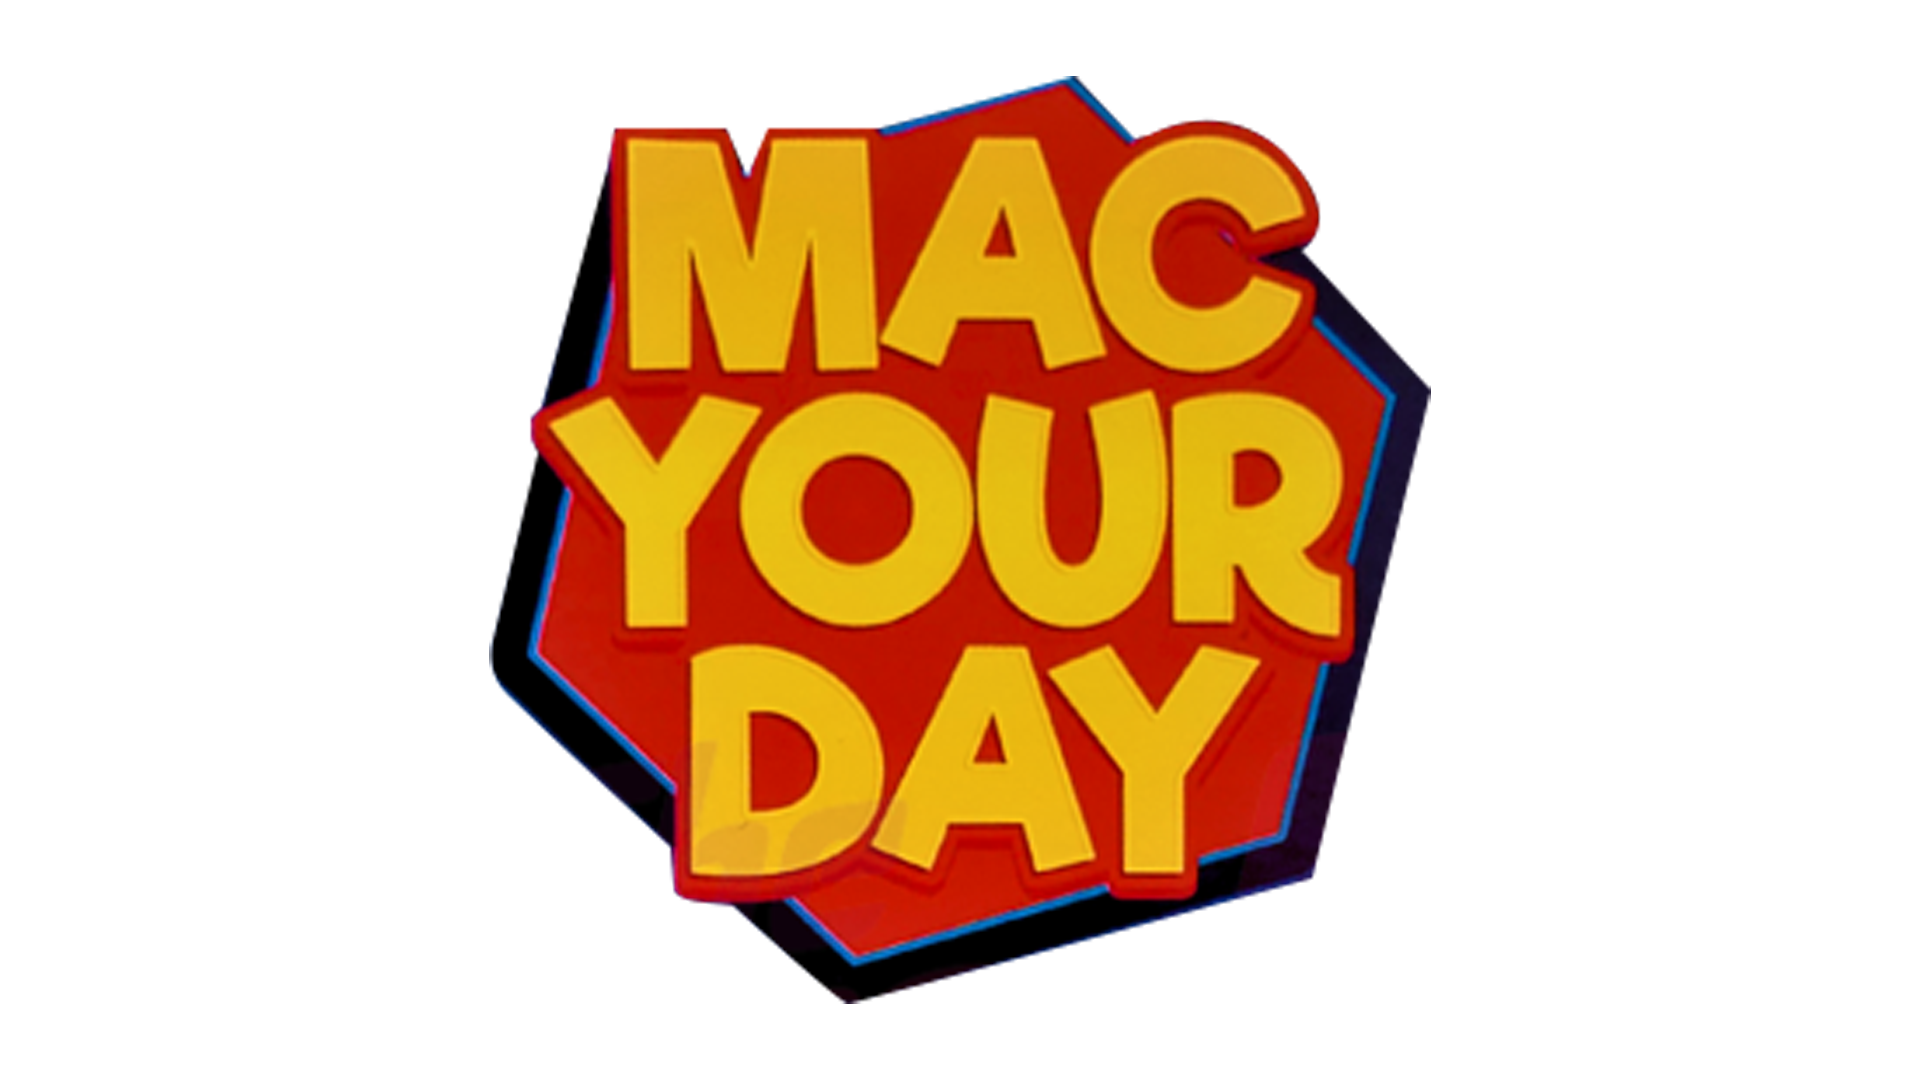 Marque: MAC YOUR DAY